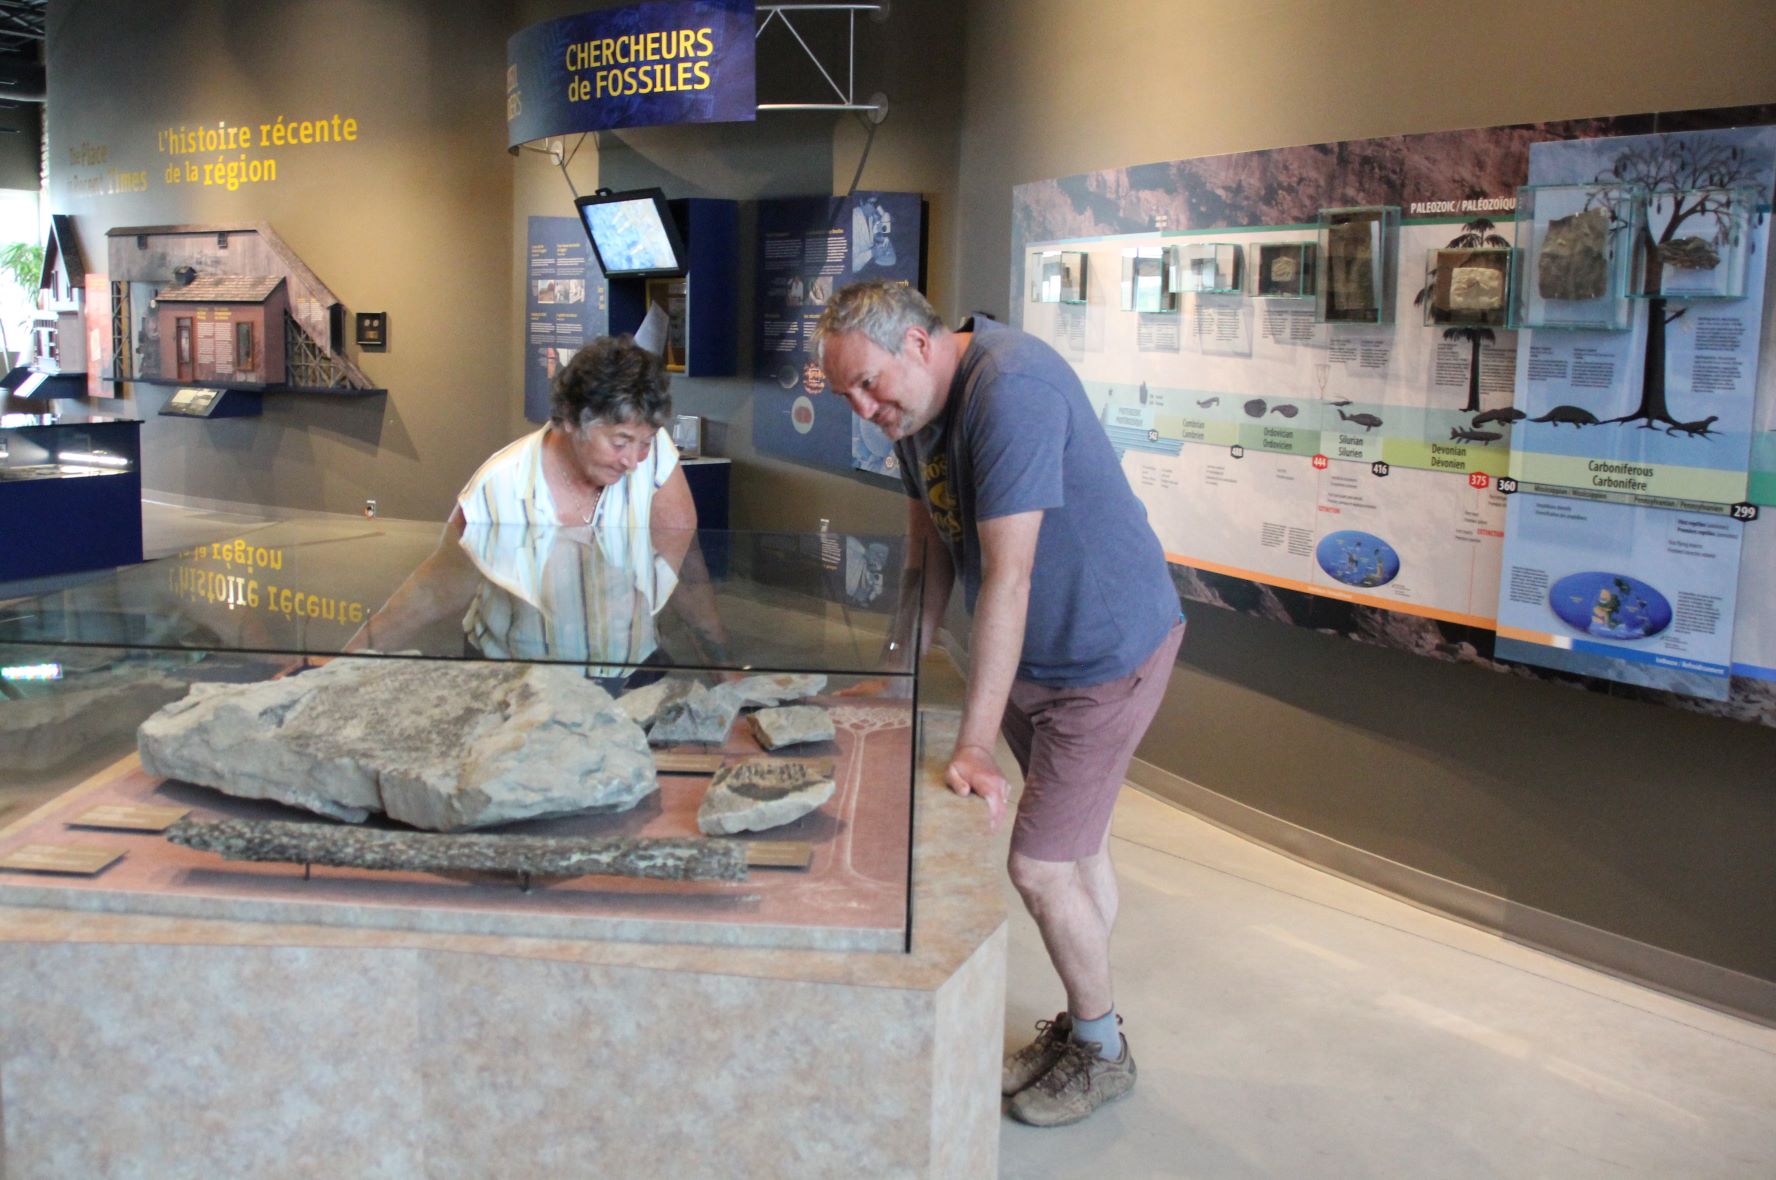 Darryl and Sandra looking at a fossil in the museum